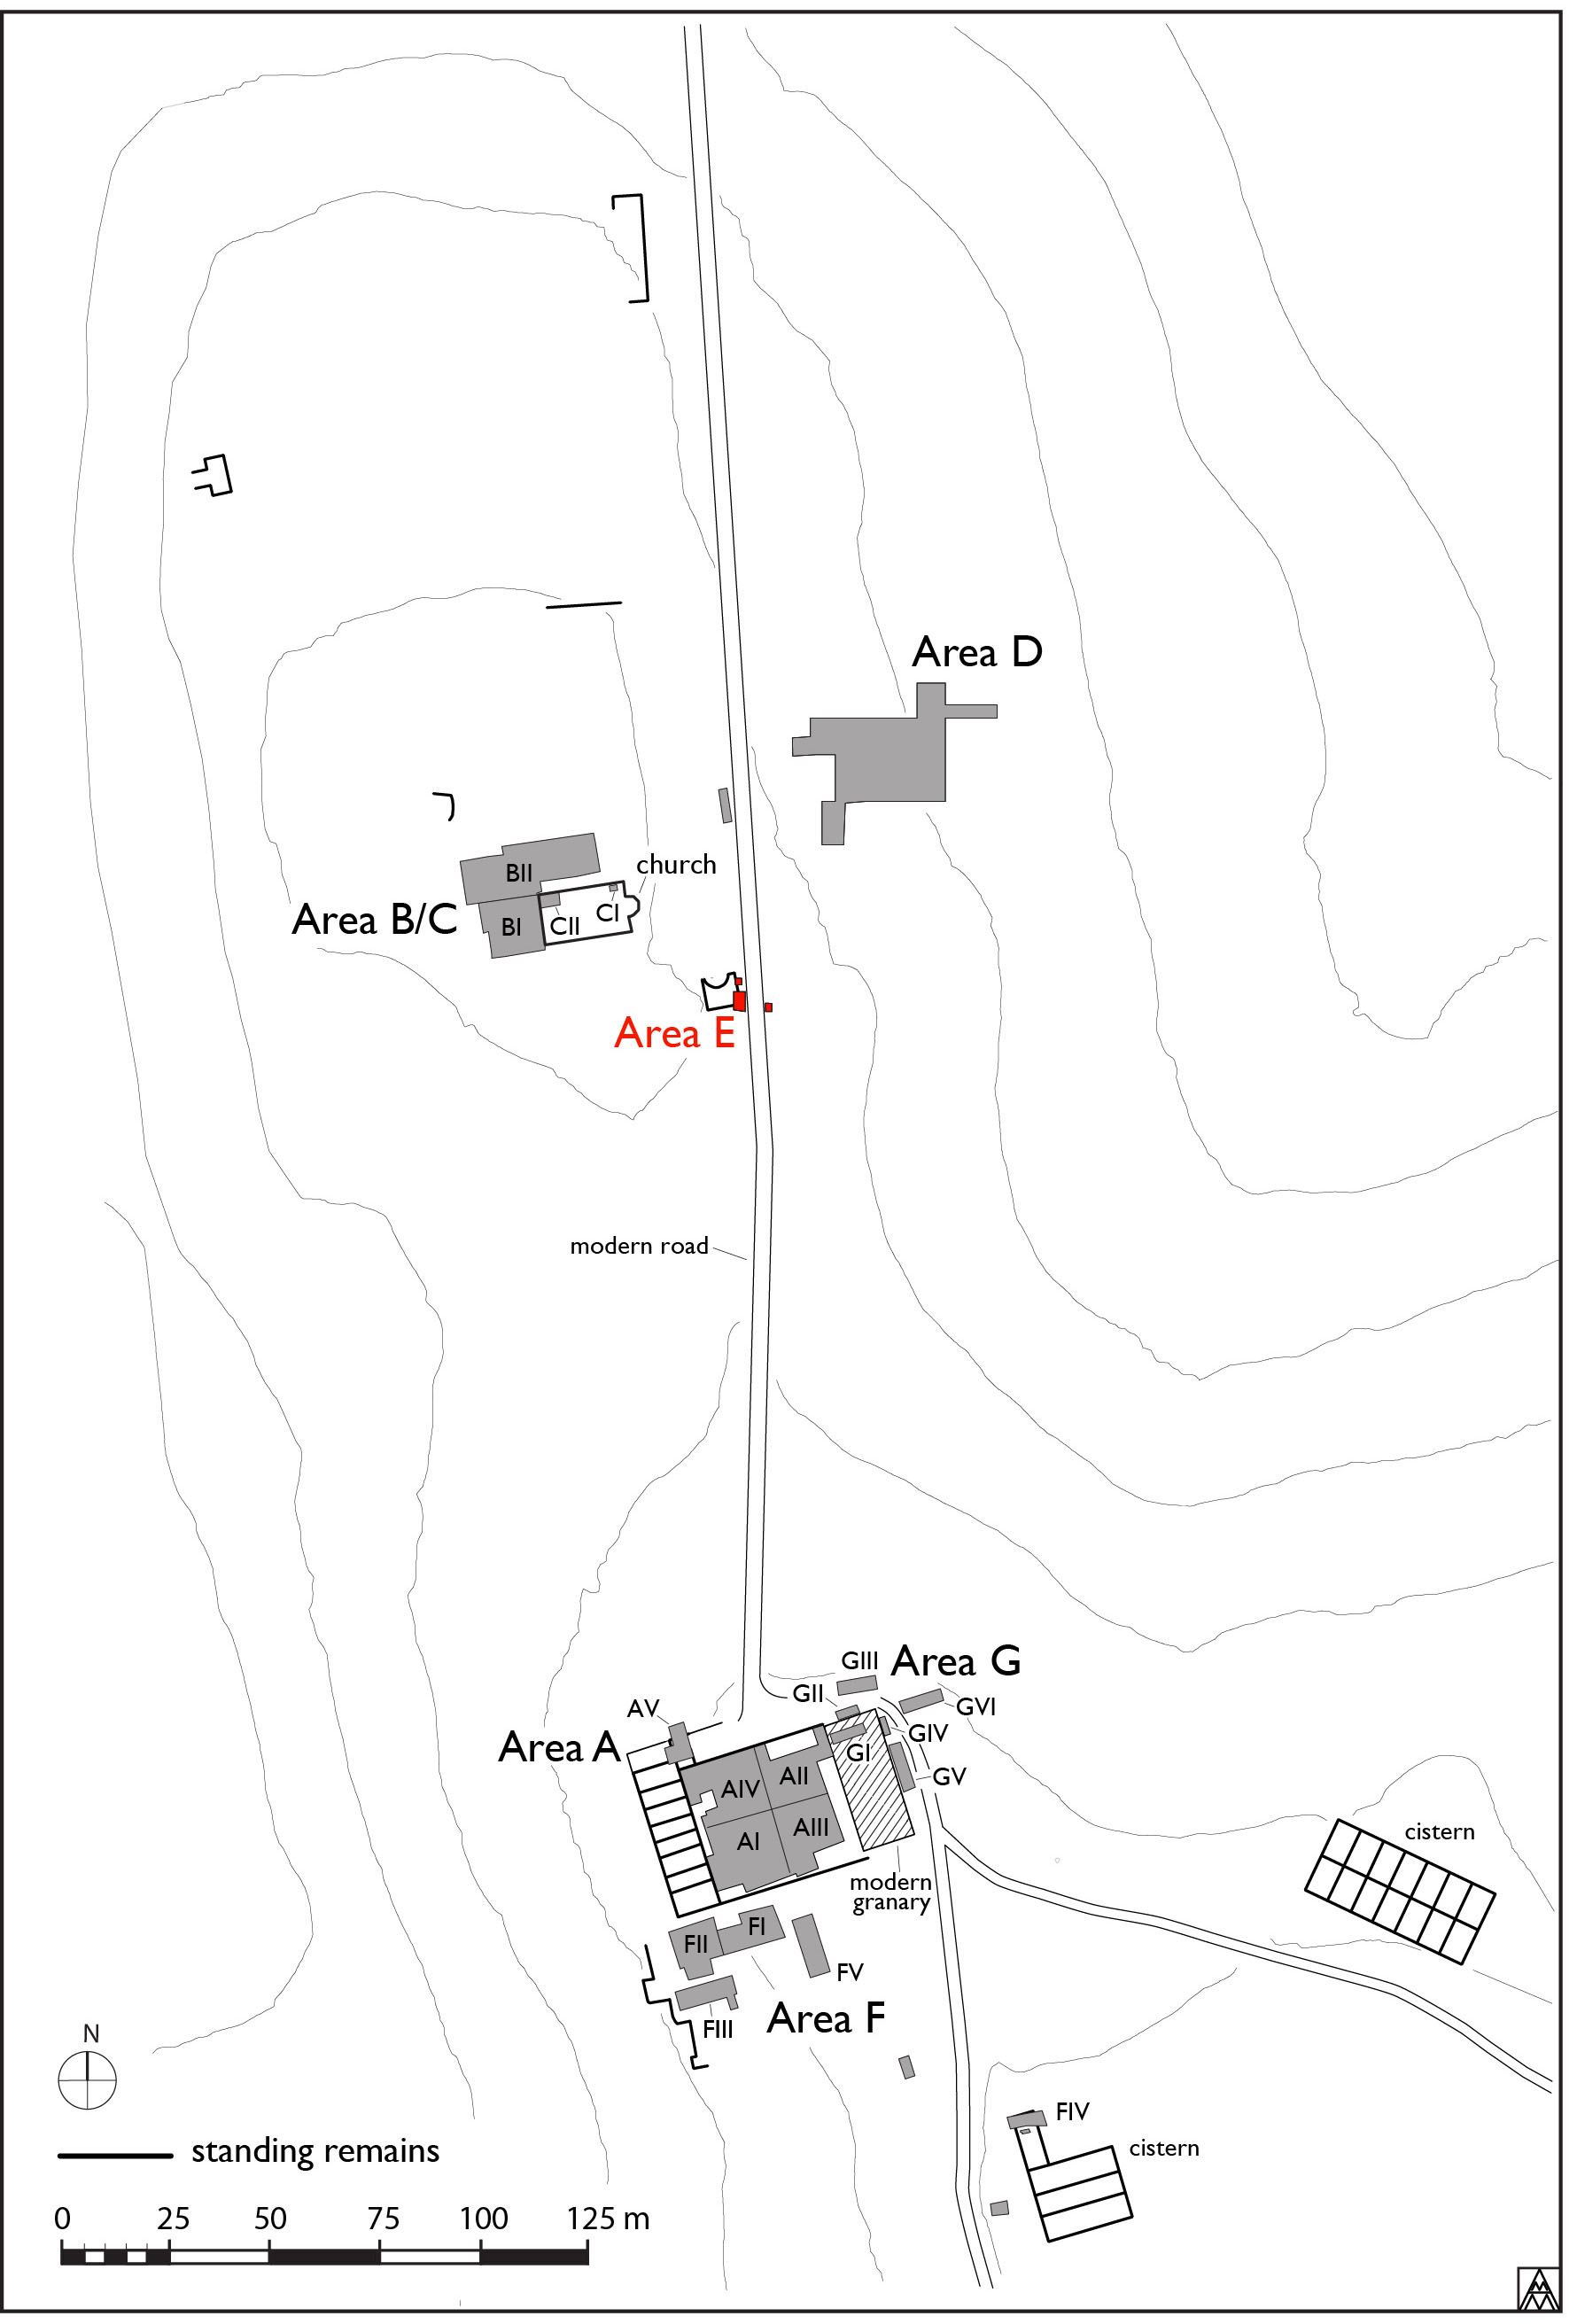 Figure 1. General site plan showing location of Area E (Margaret Andrews).